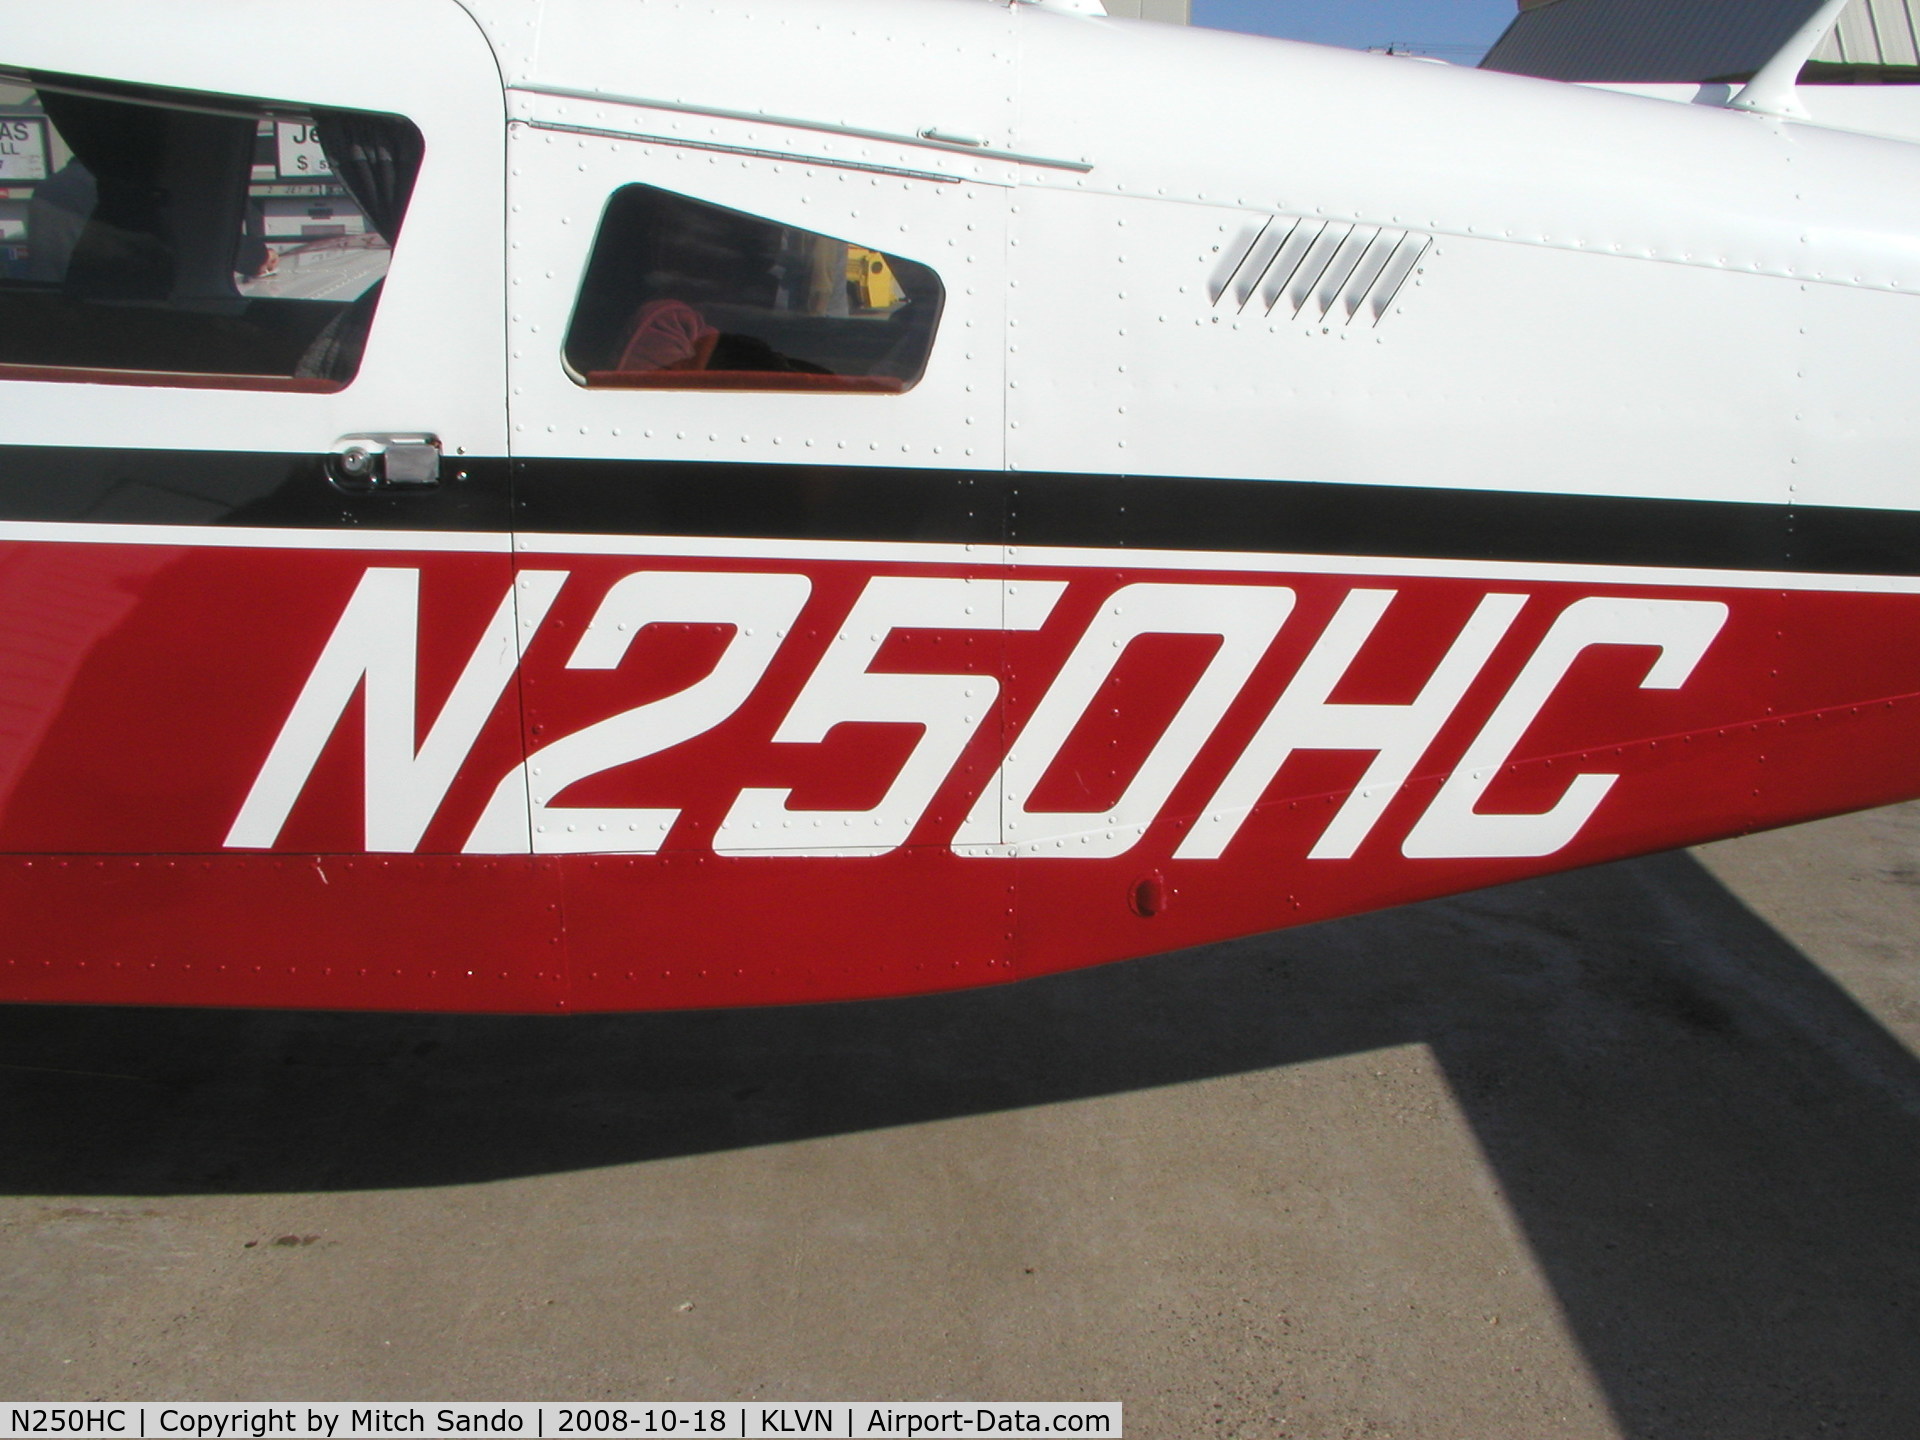 N250HC, 1977 Piper PA-32R-300 Cherokee Lance C/N 32R-7880037, Parked at the fuel pumps.